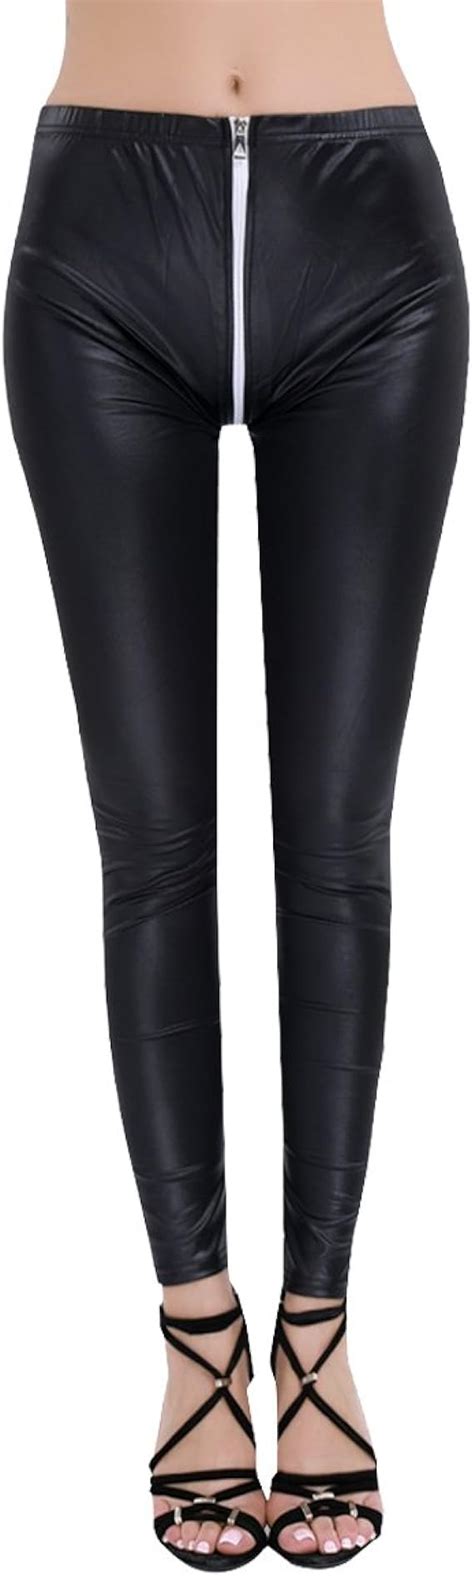 iefiel women two way zipper open crotch stretchy faux leather leggings skinny pants at amazon